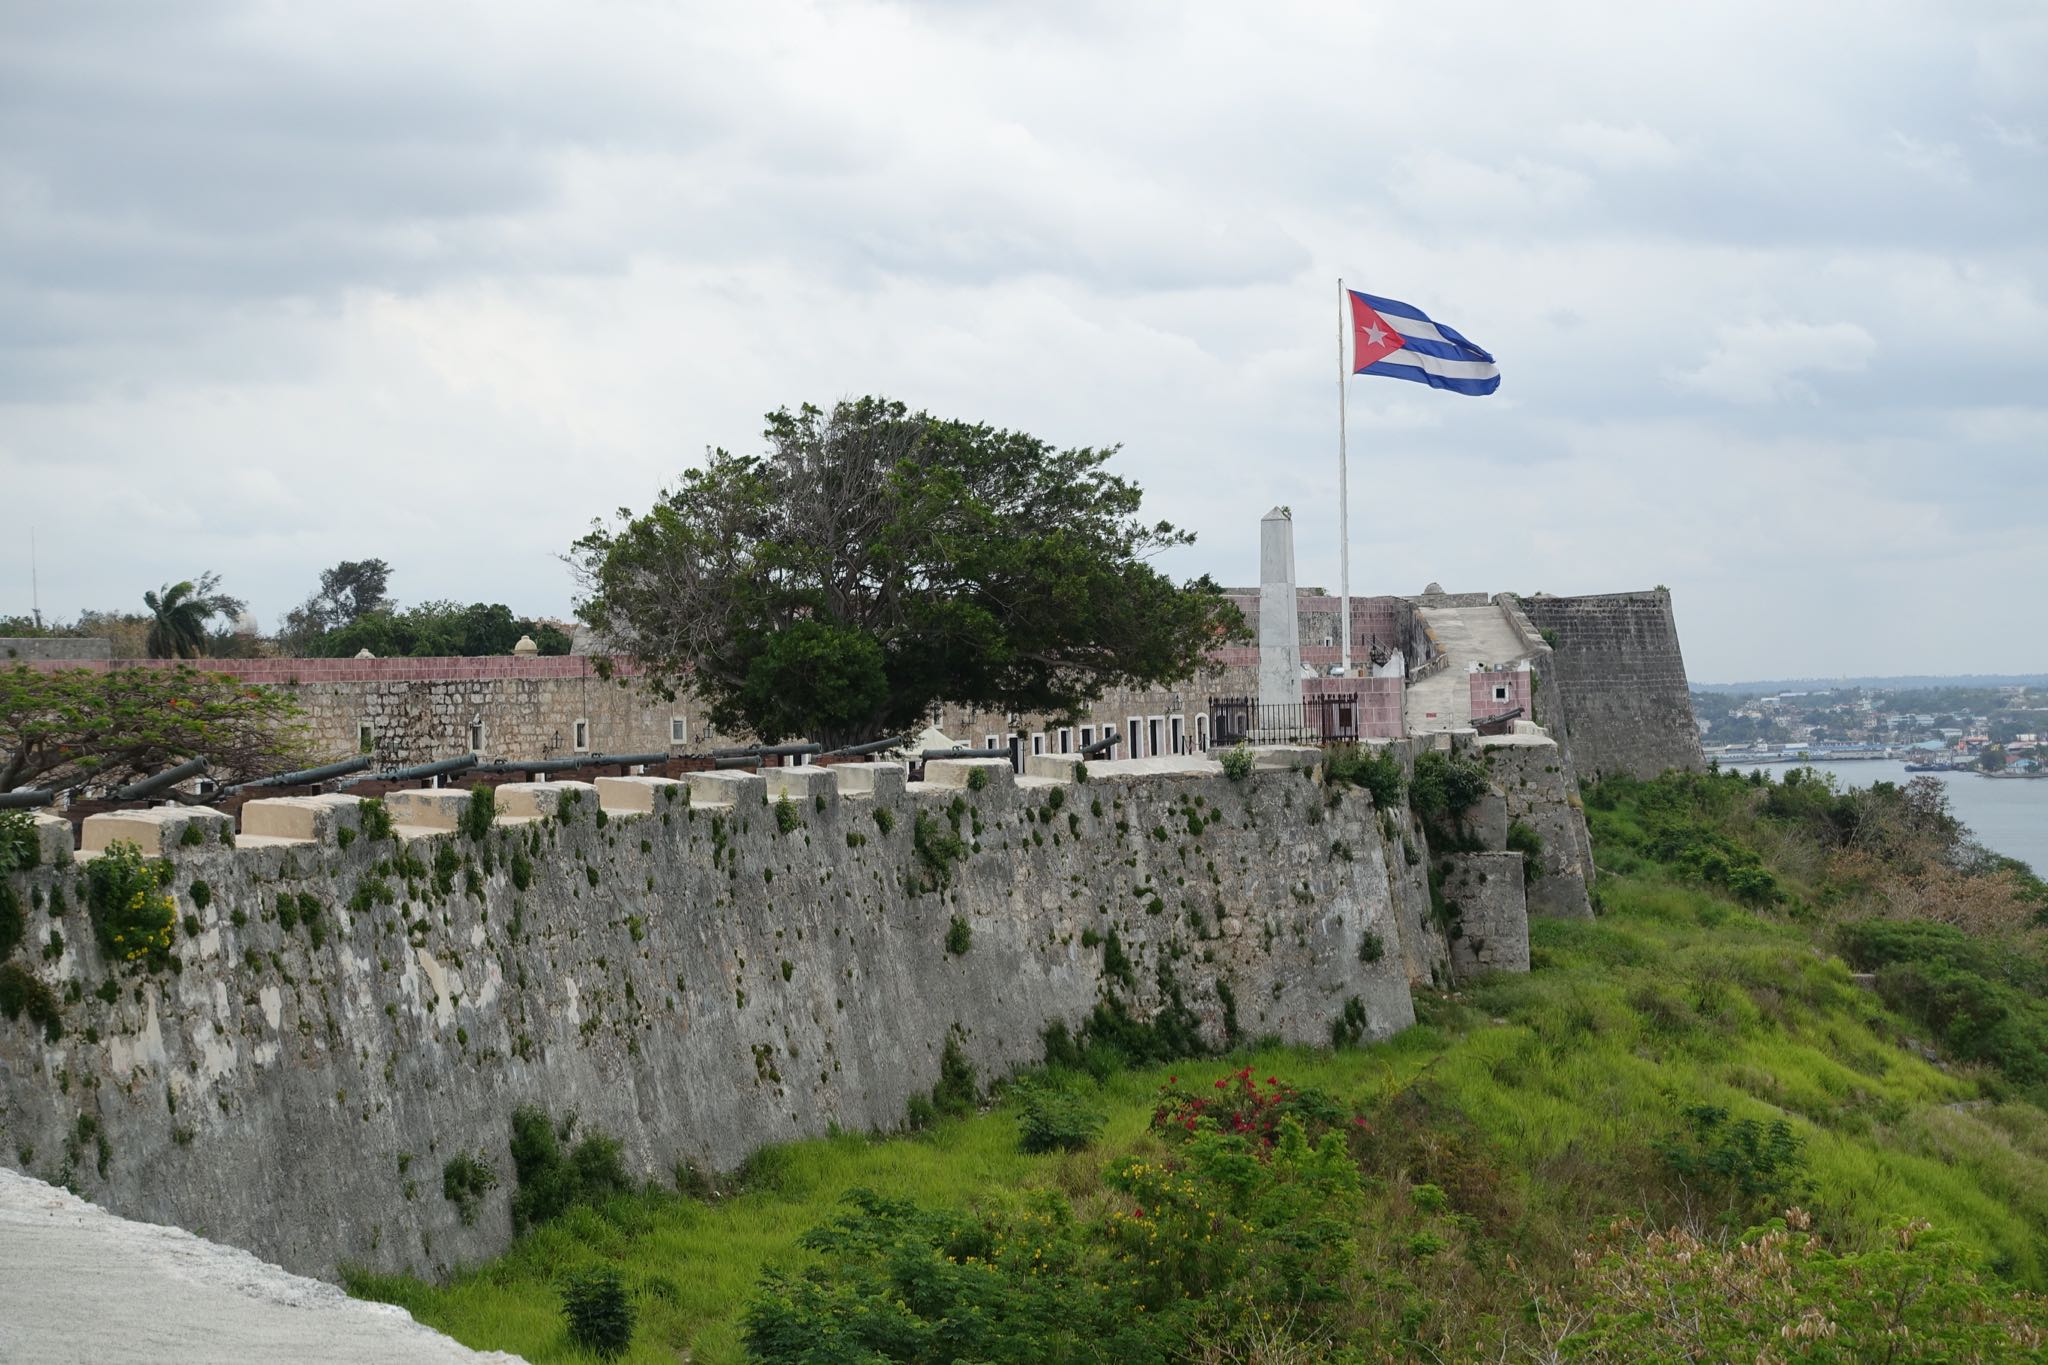 Photo 69 of 221 from the album Highlights Cuba 2019.